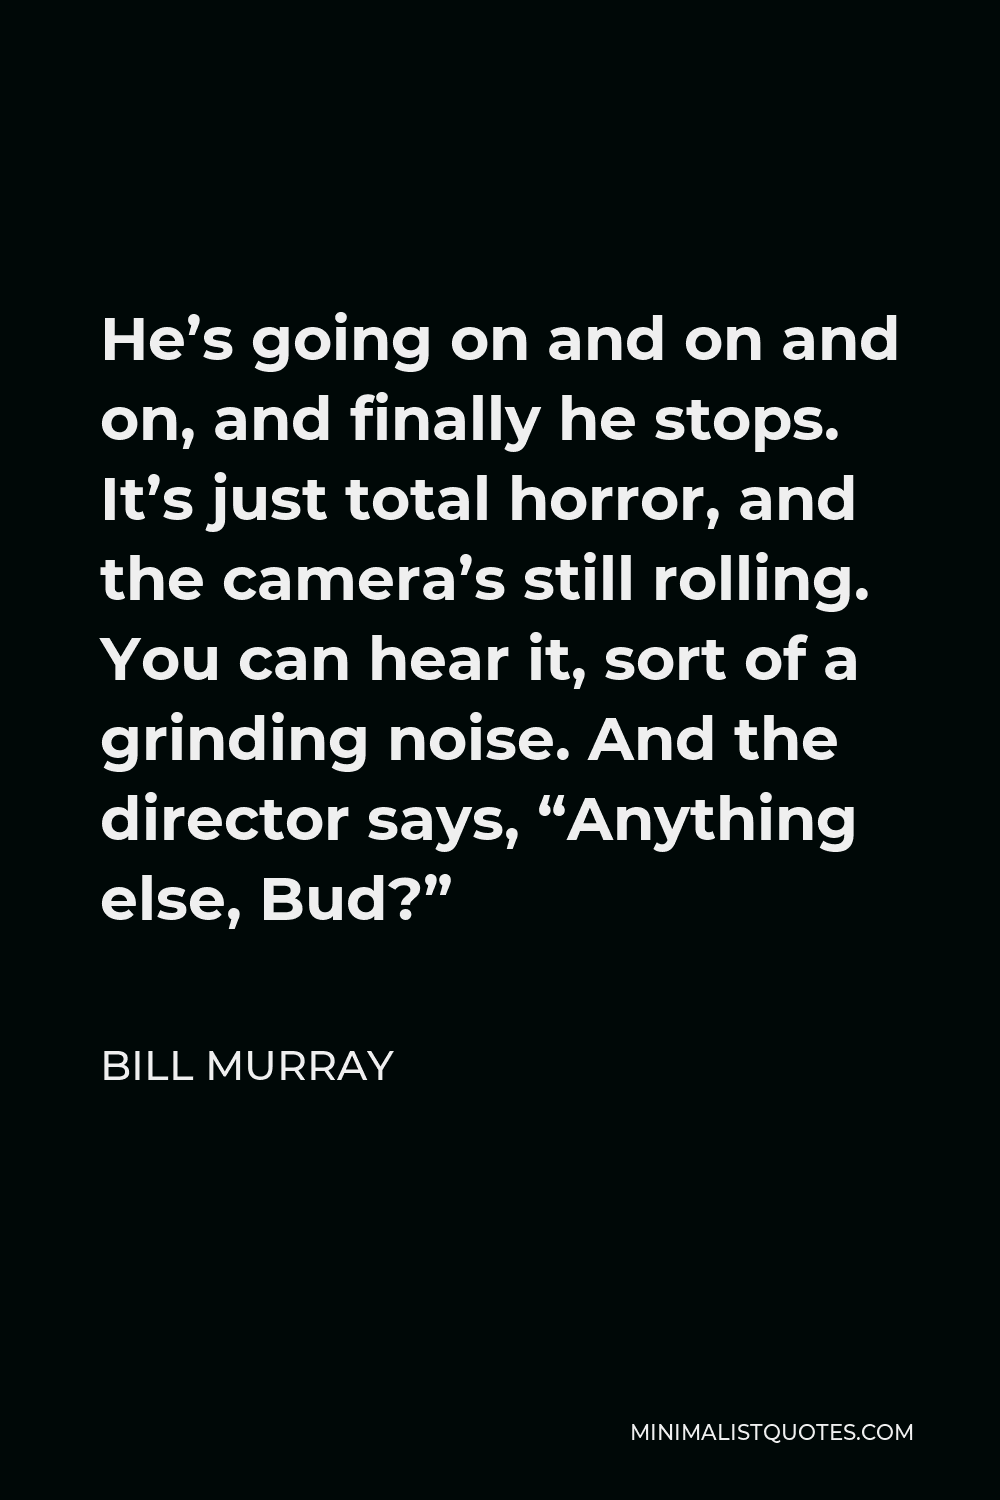 Bill Murray Quote - He’s going on and on and on, and finally he stops. It’s just total horror, and the camera’s still rolling. You can hear it, sort of a grinding noise. And the director says, “Anything else, Bud?”